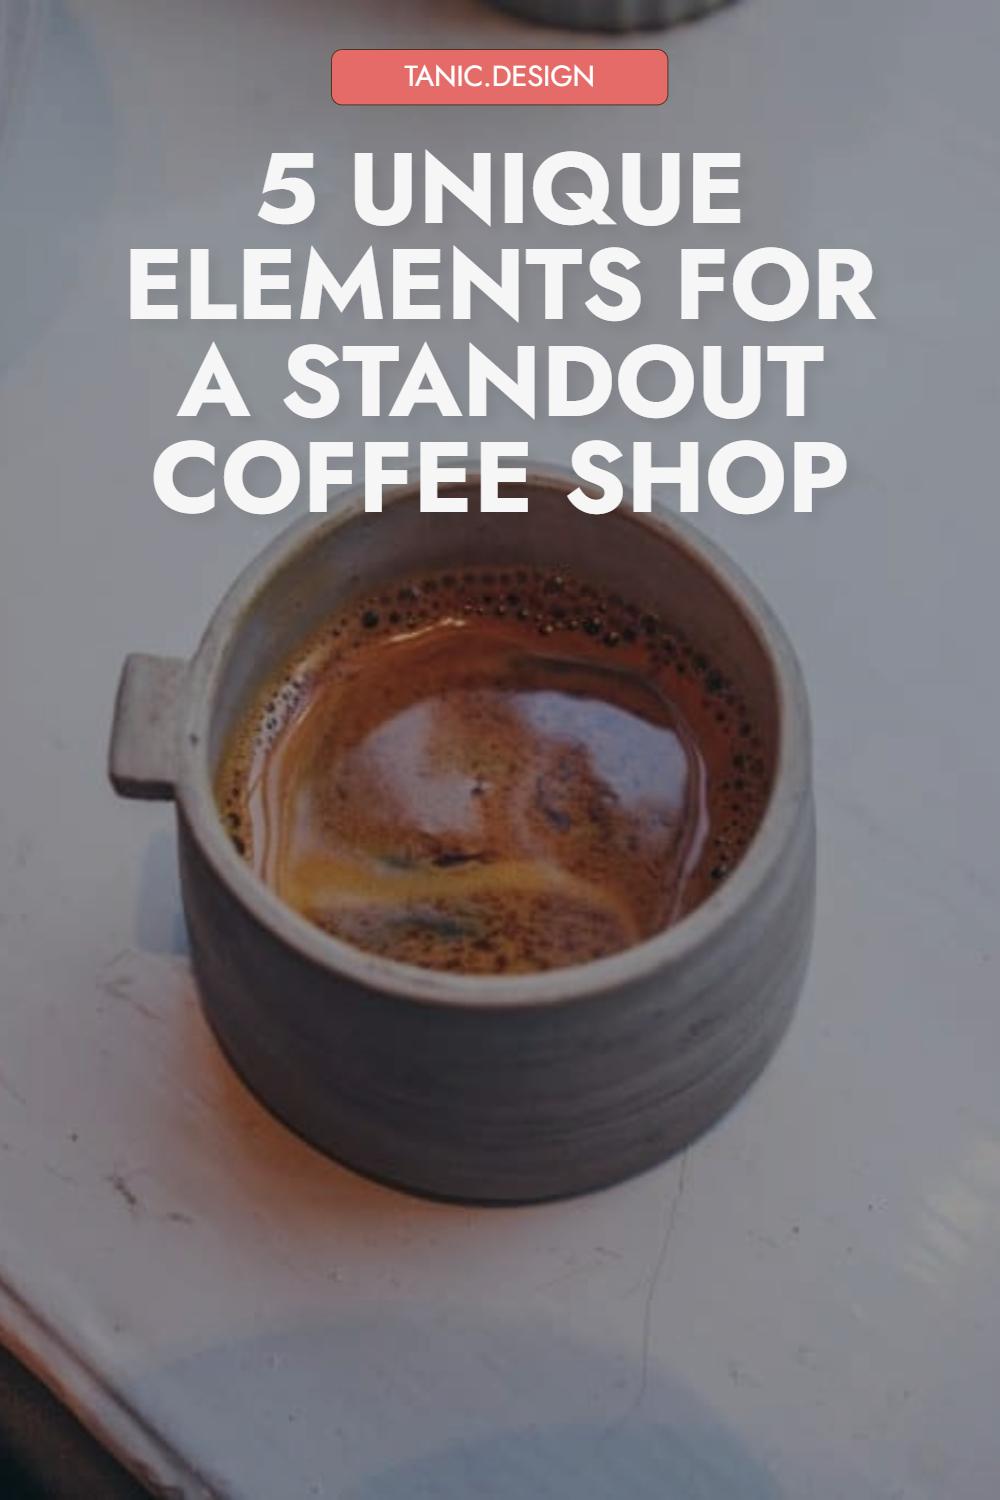 Strategies for Creating a Unique Coffee Shop